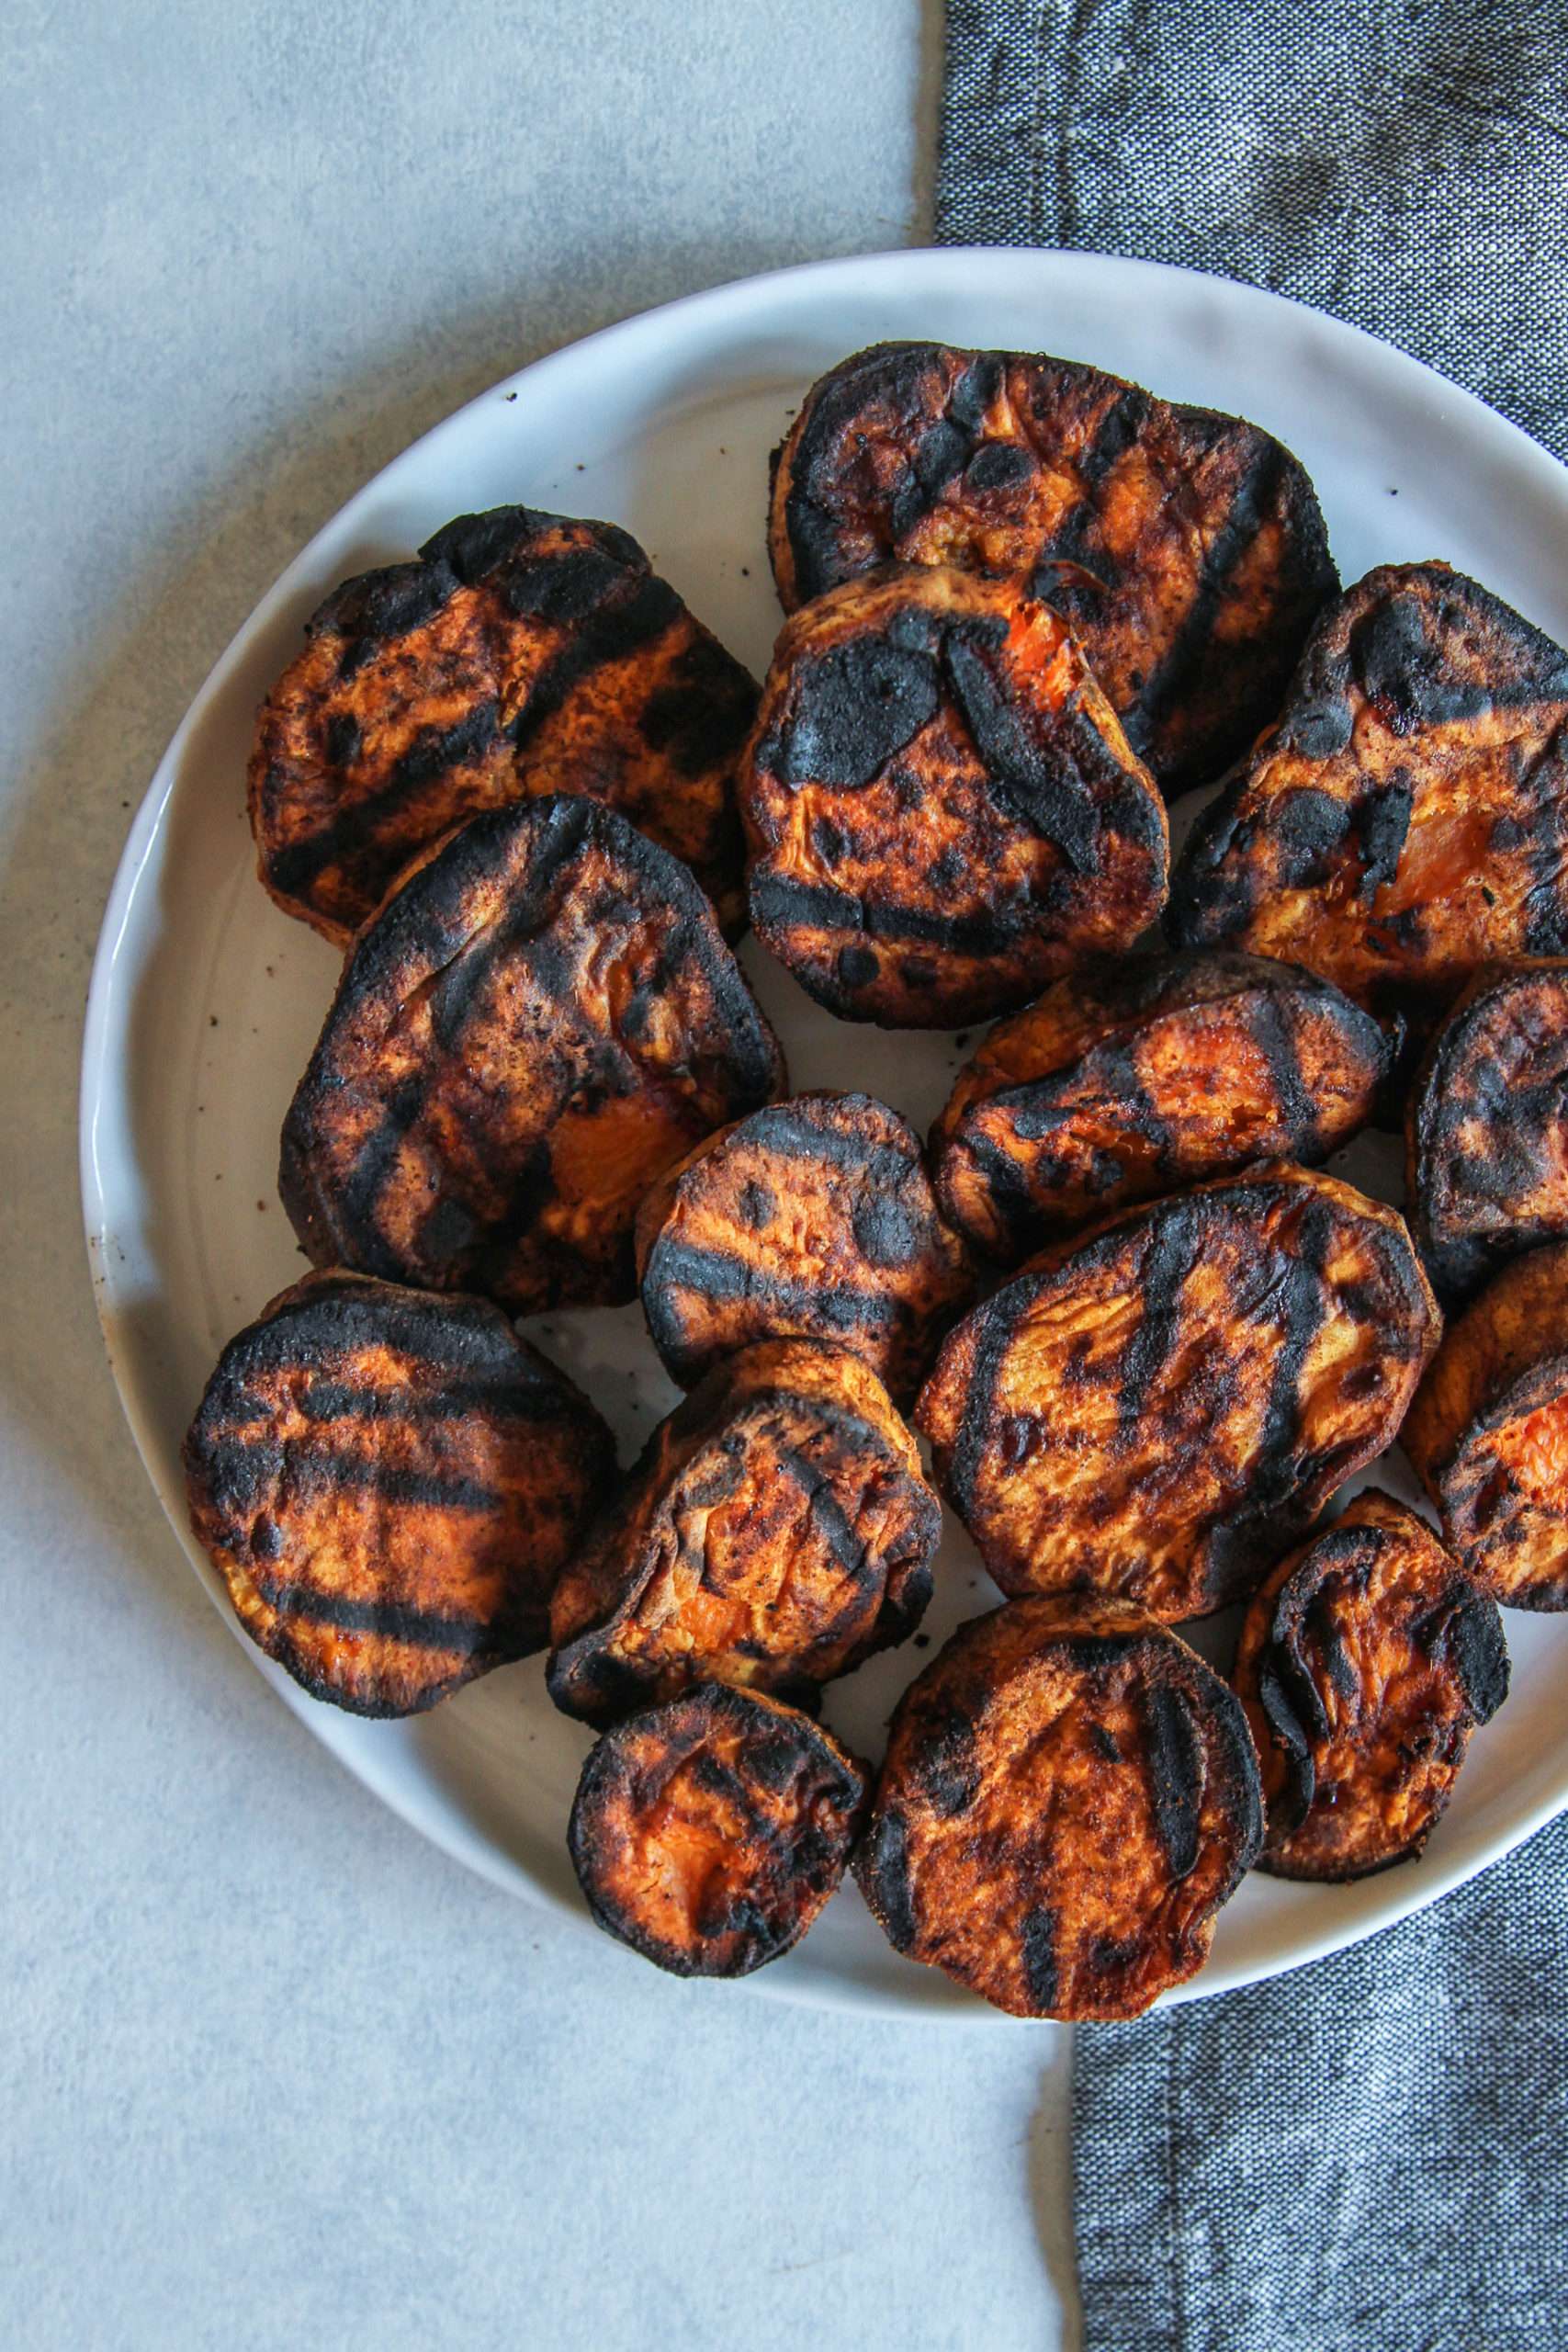 An easy way to grill sweet potatoes